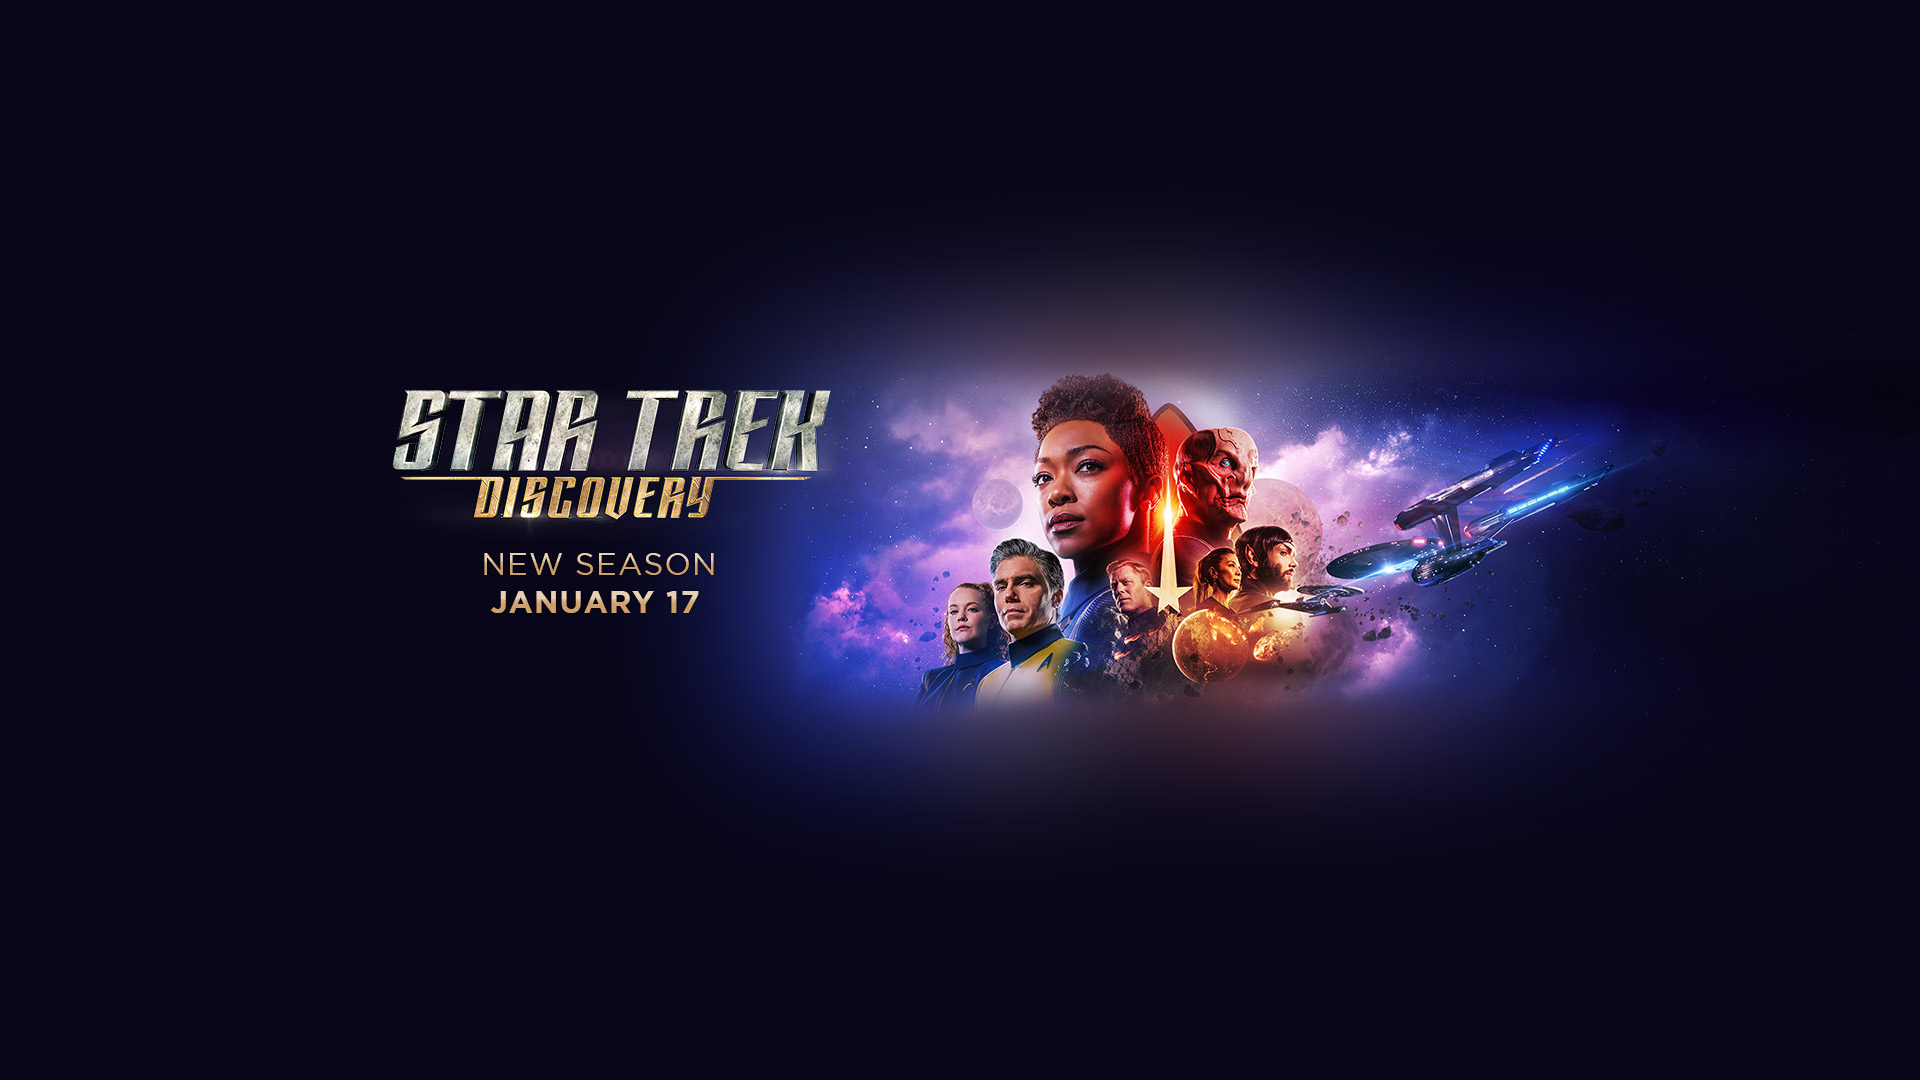 How And When To Stream The Season 2 Premiere Of Star Trek: Discovery1920 x 1080